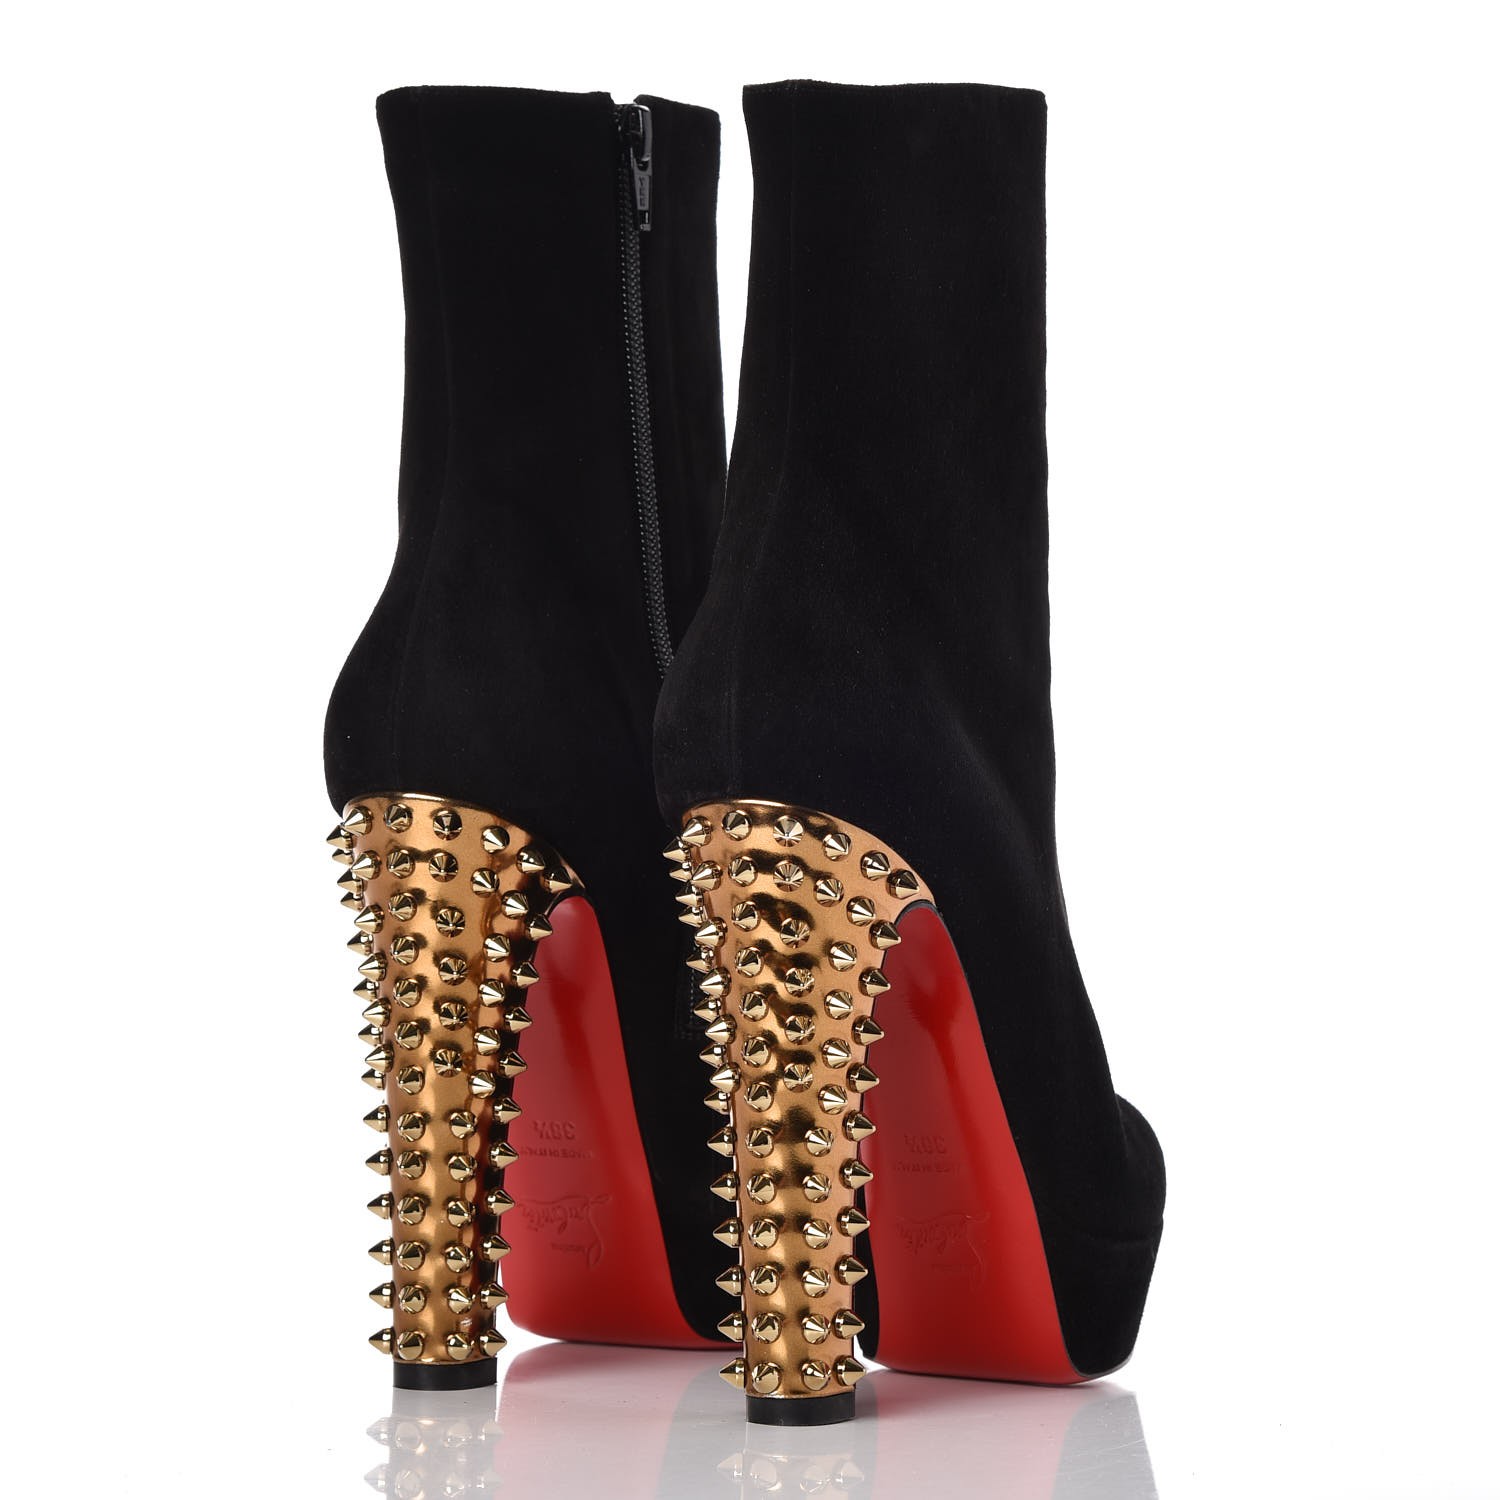 CHRISTIAN LOUBOUTIN Suede Taclou Studded Heel 140 Platform Ankle Boots ...